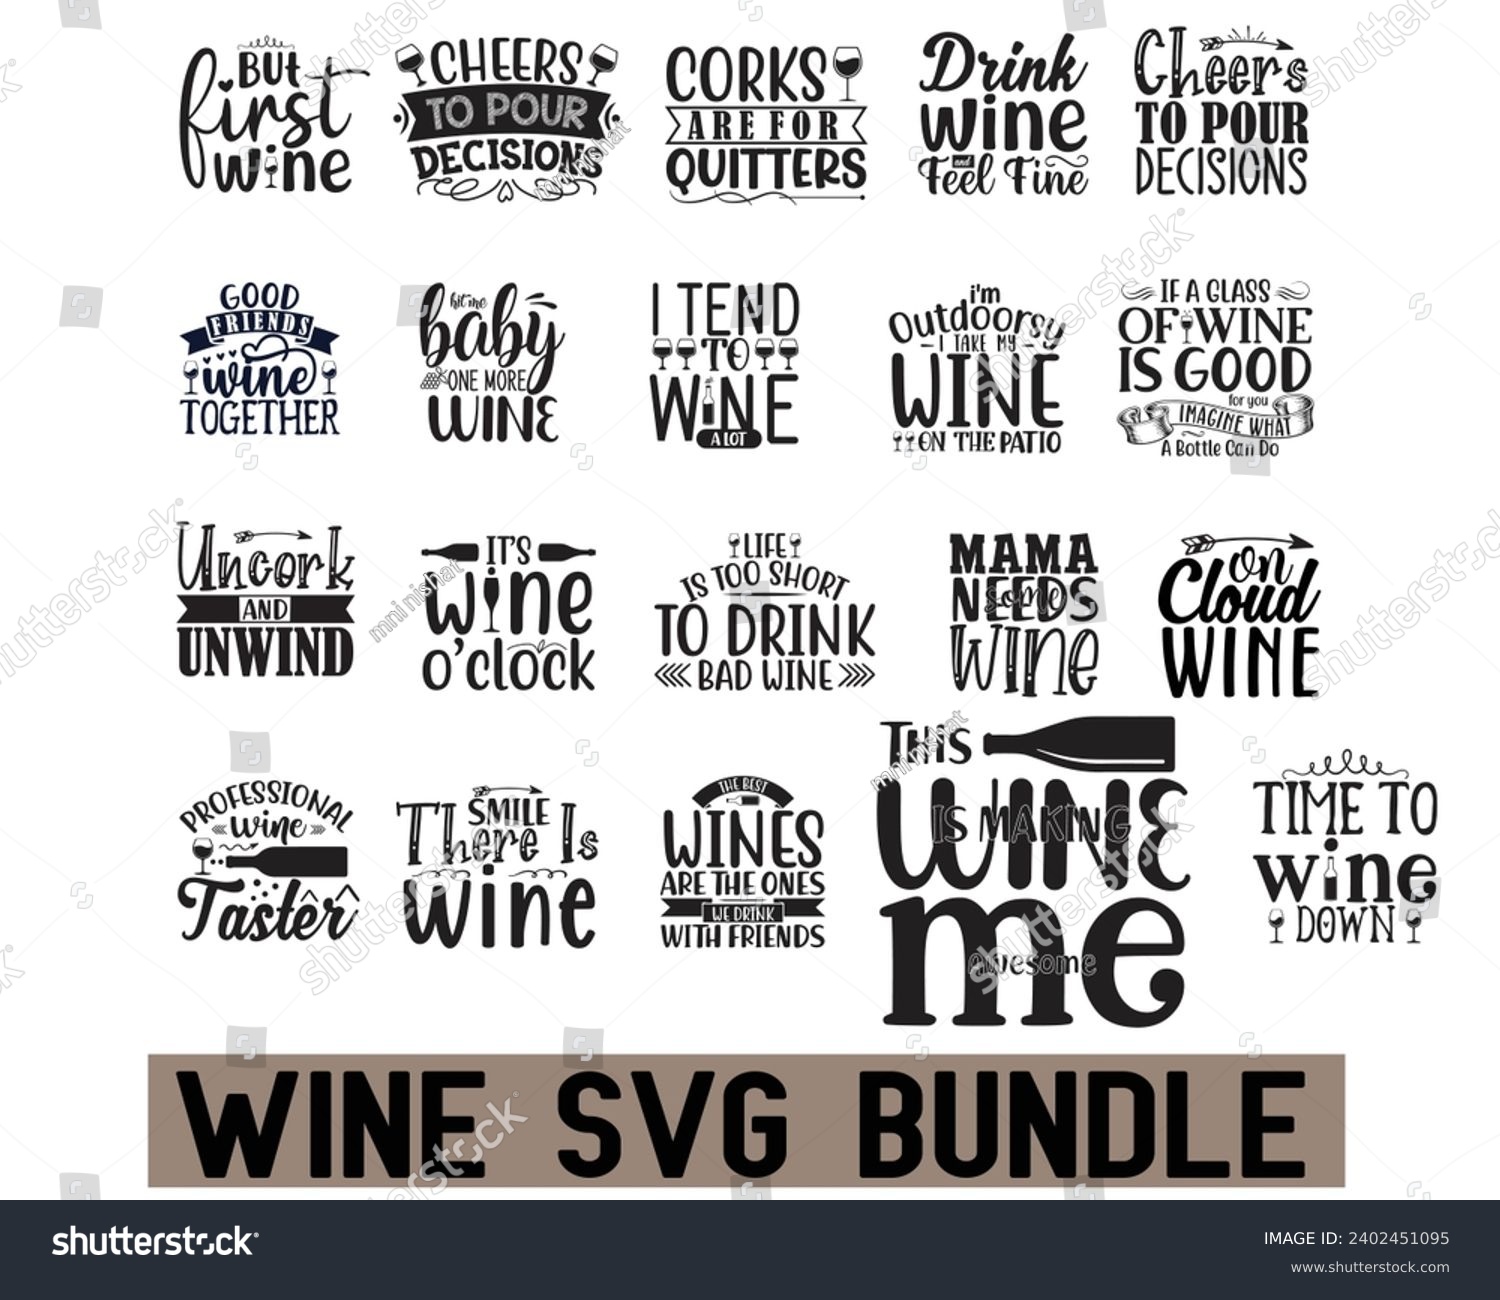 SVG of Are you looking for a Wine bundle? svg